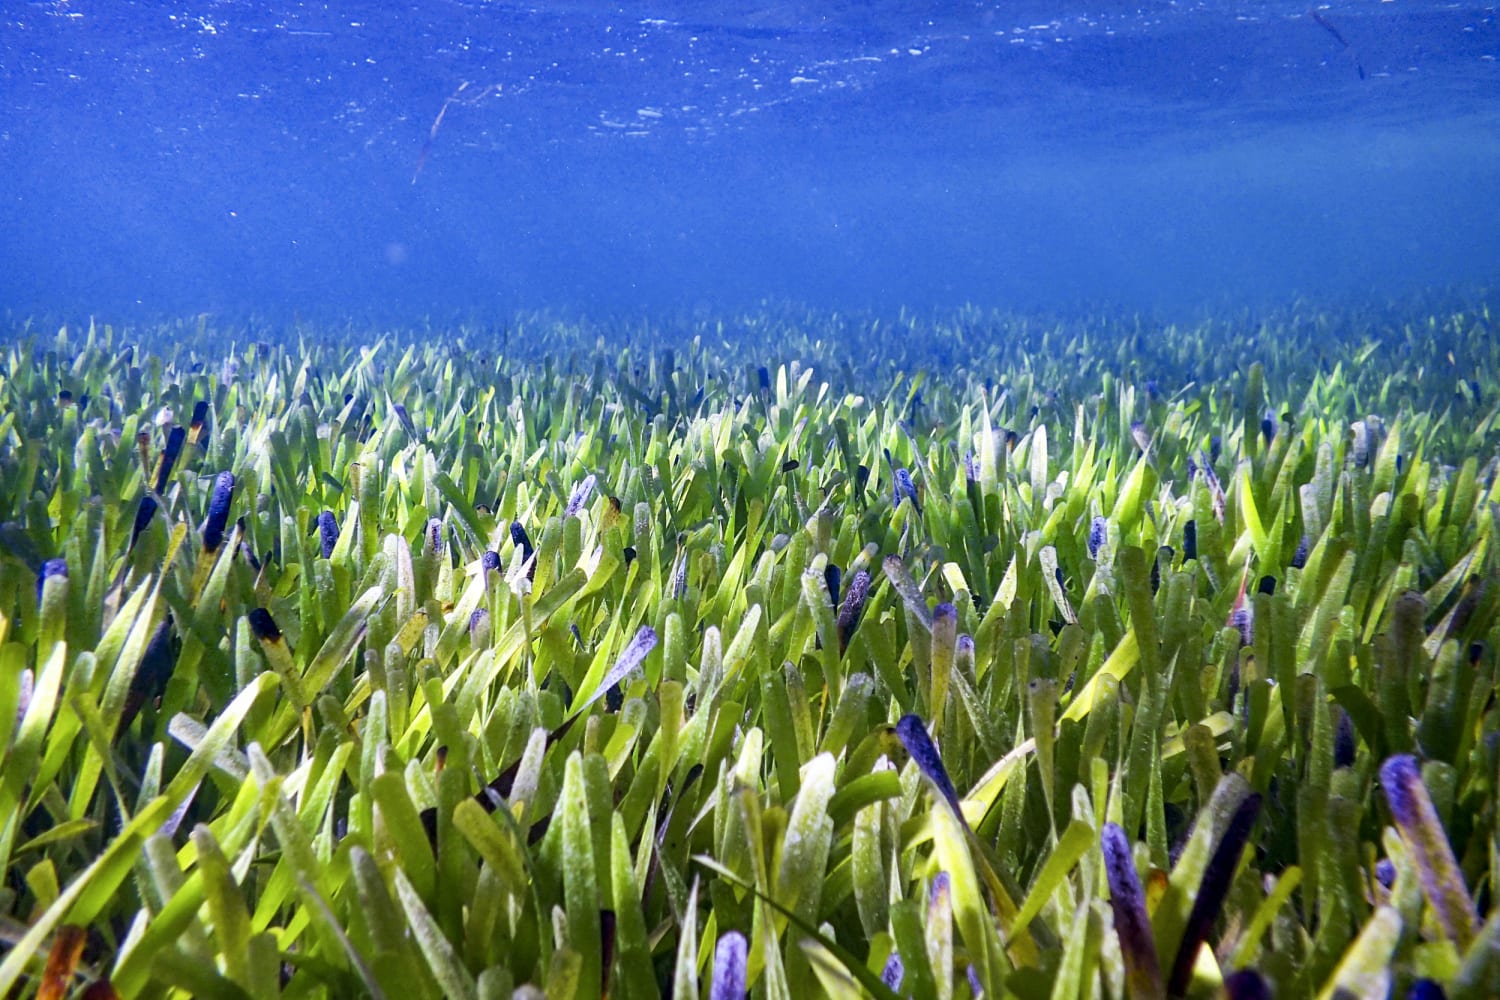 World's largest plant is a vast seagrass meadow in Australia